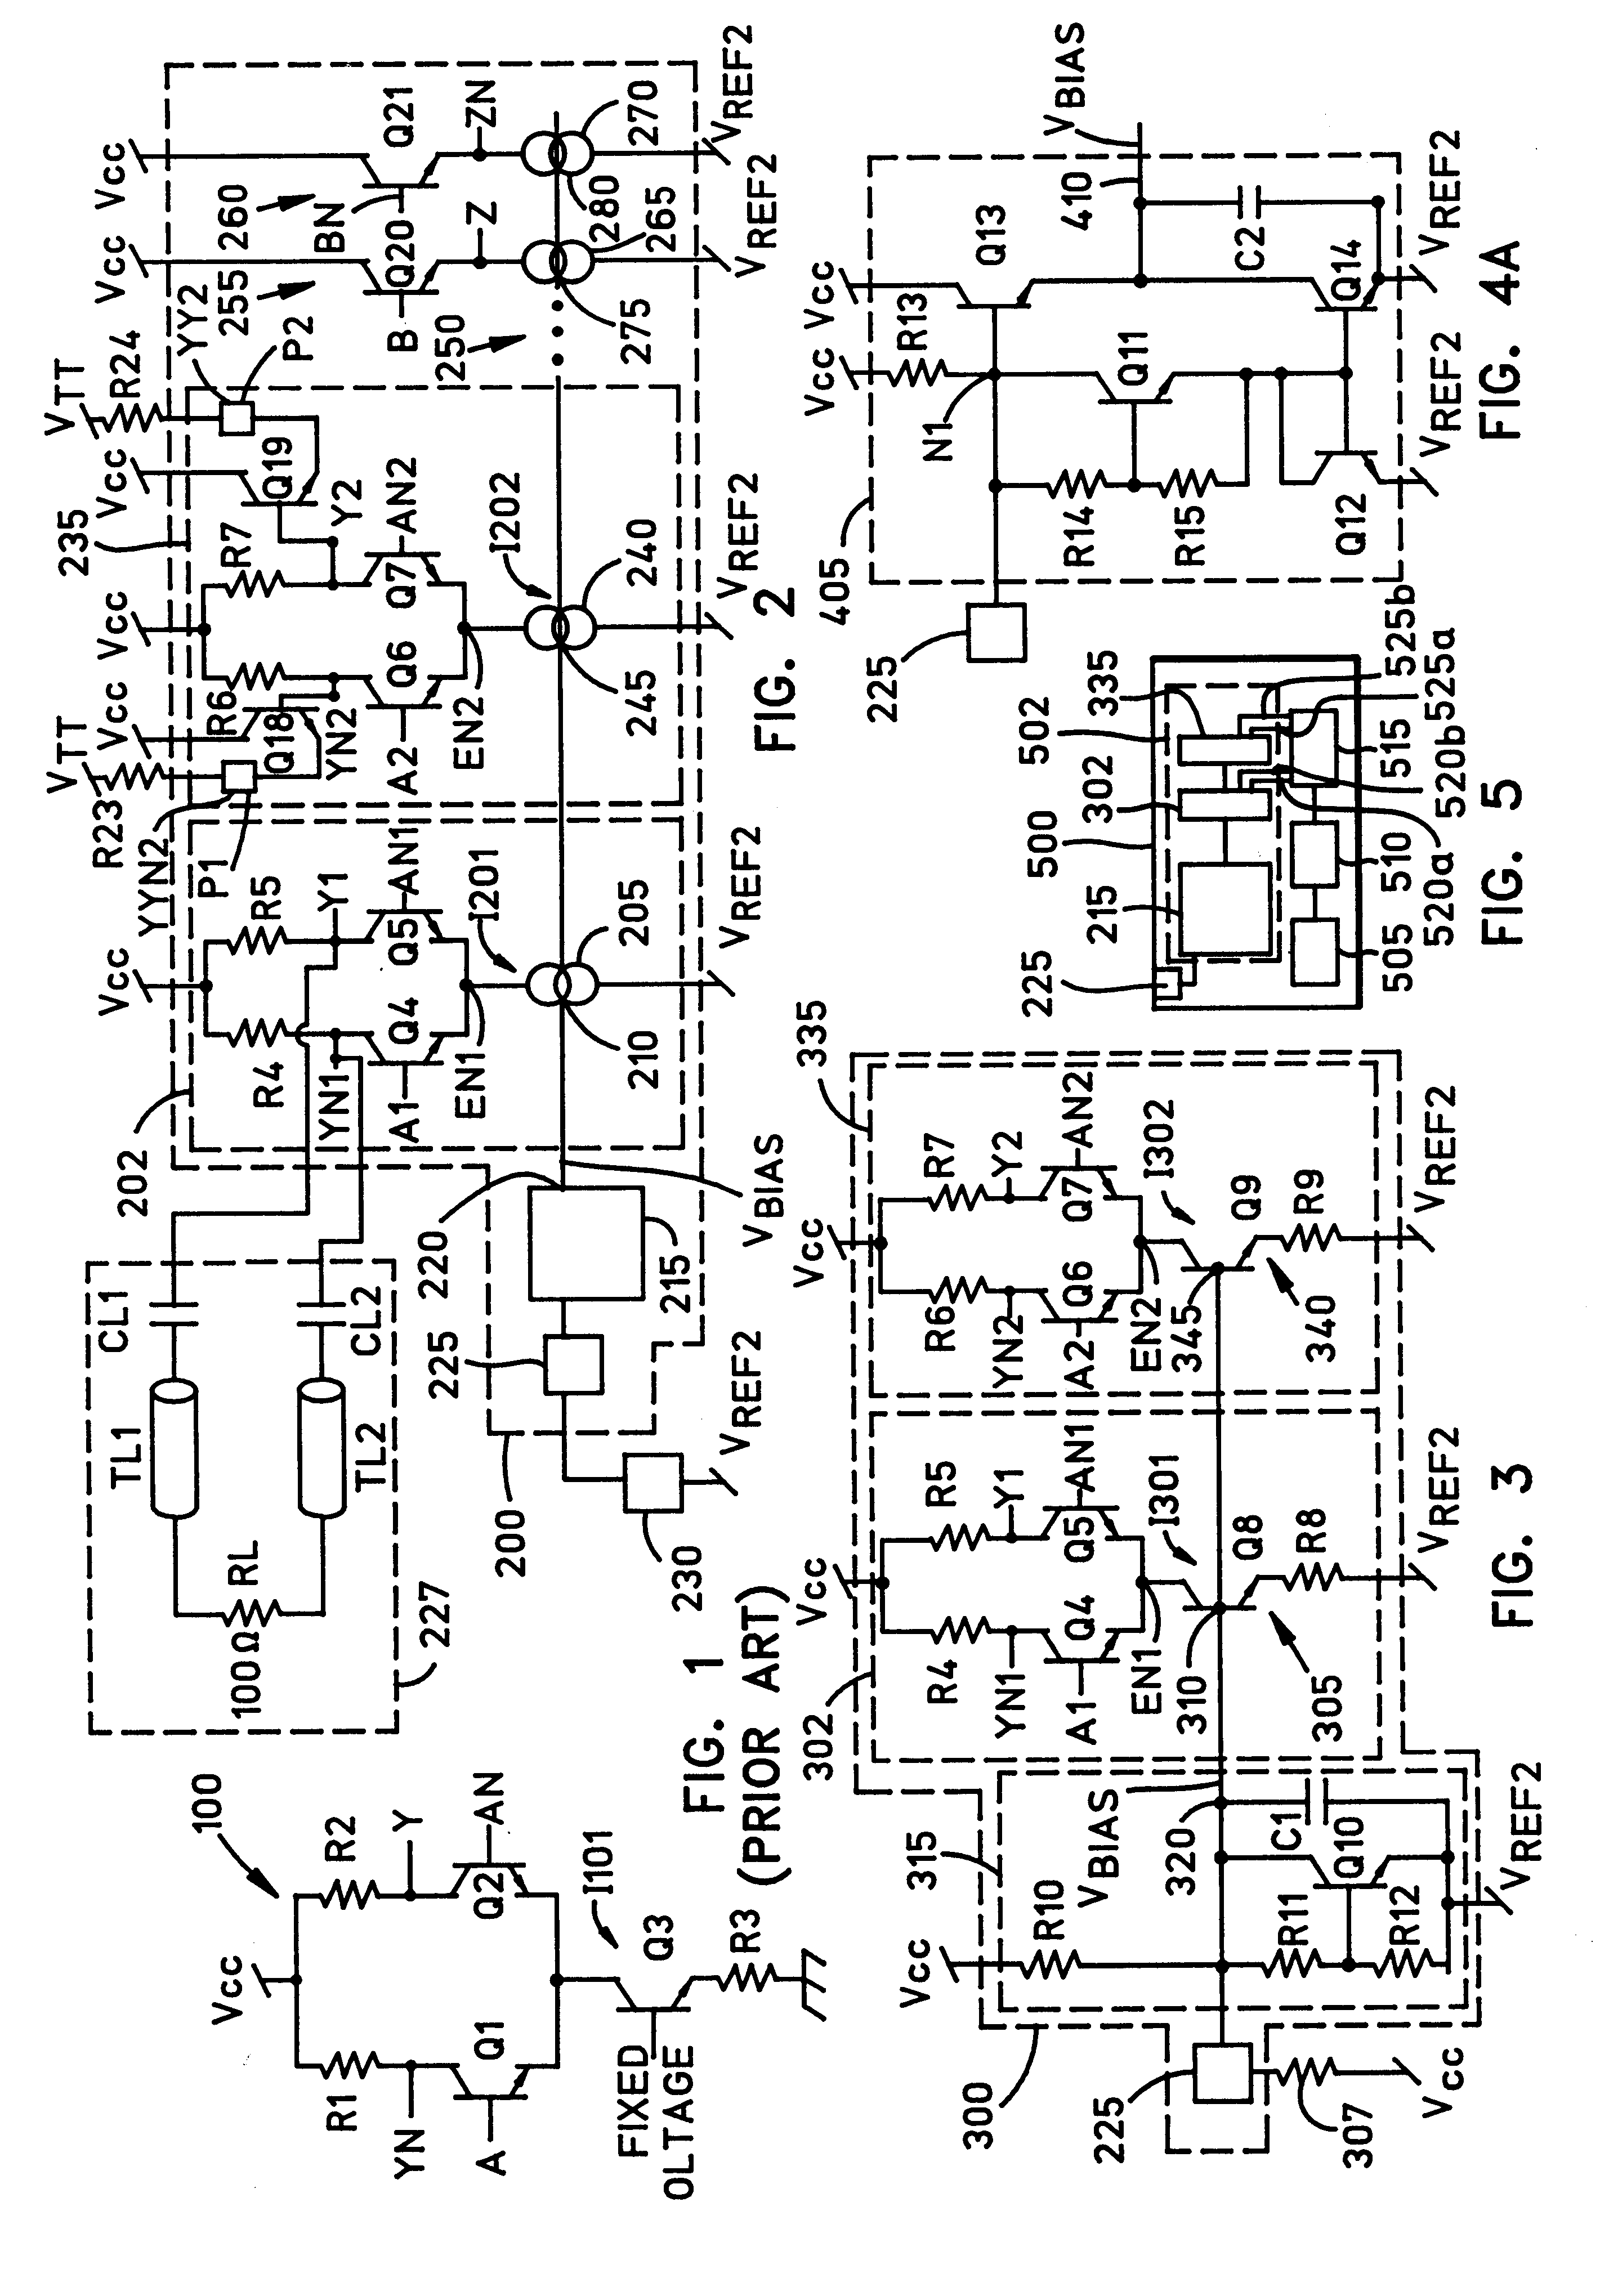 Output buffer with programmable voltage swing